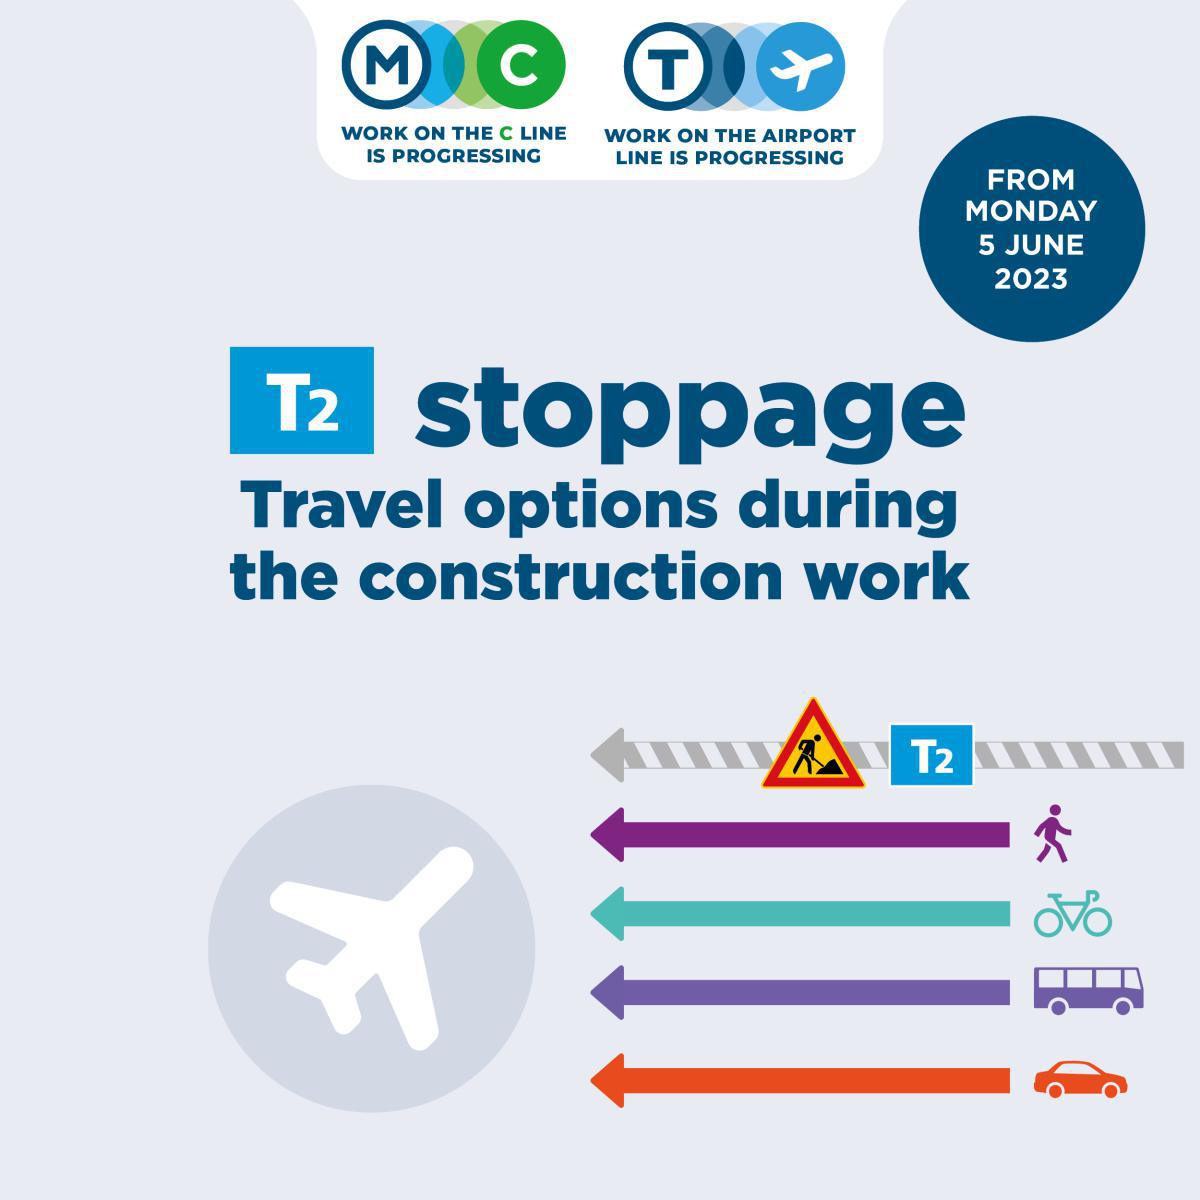 T2 Stoppage : travel options (from monday 5 june 2023)